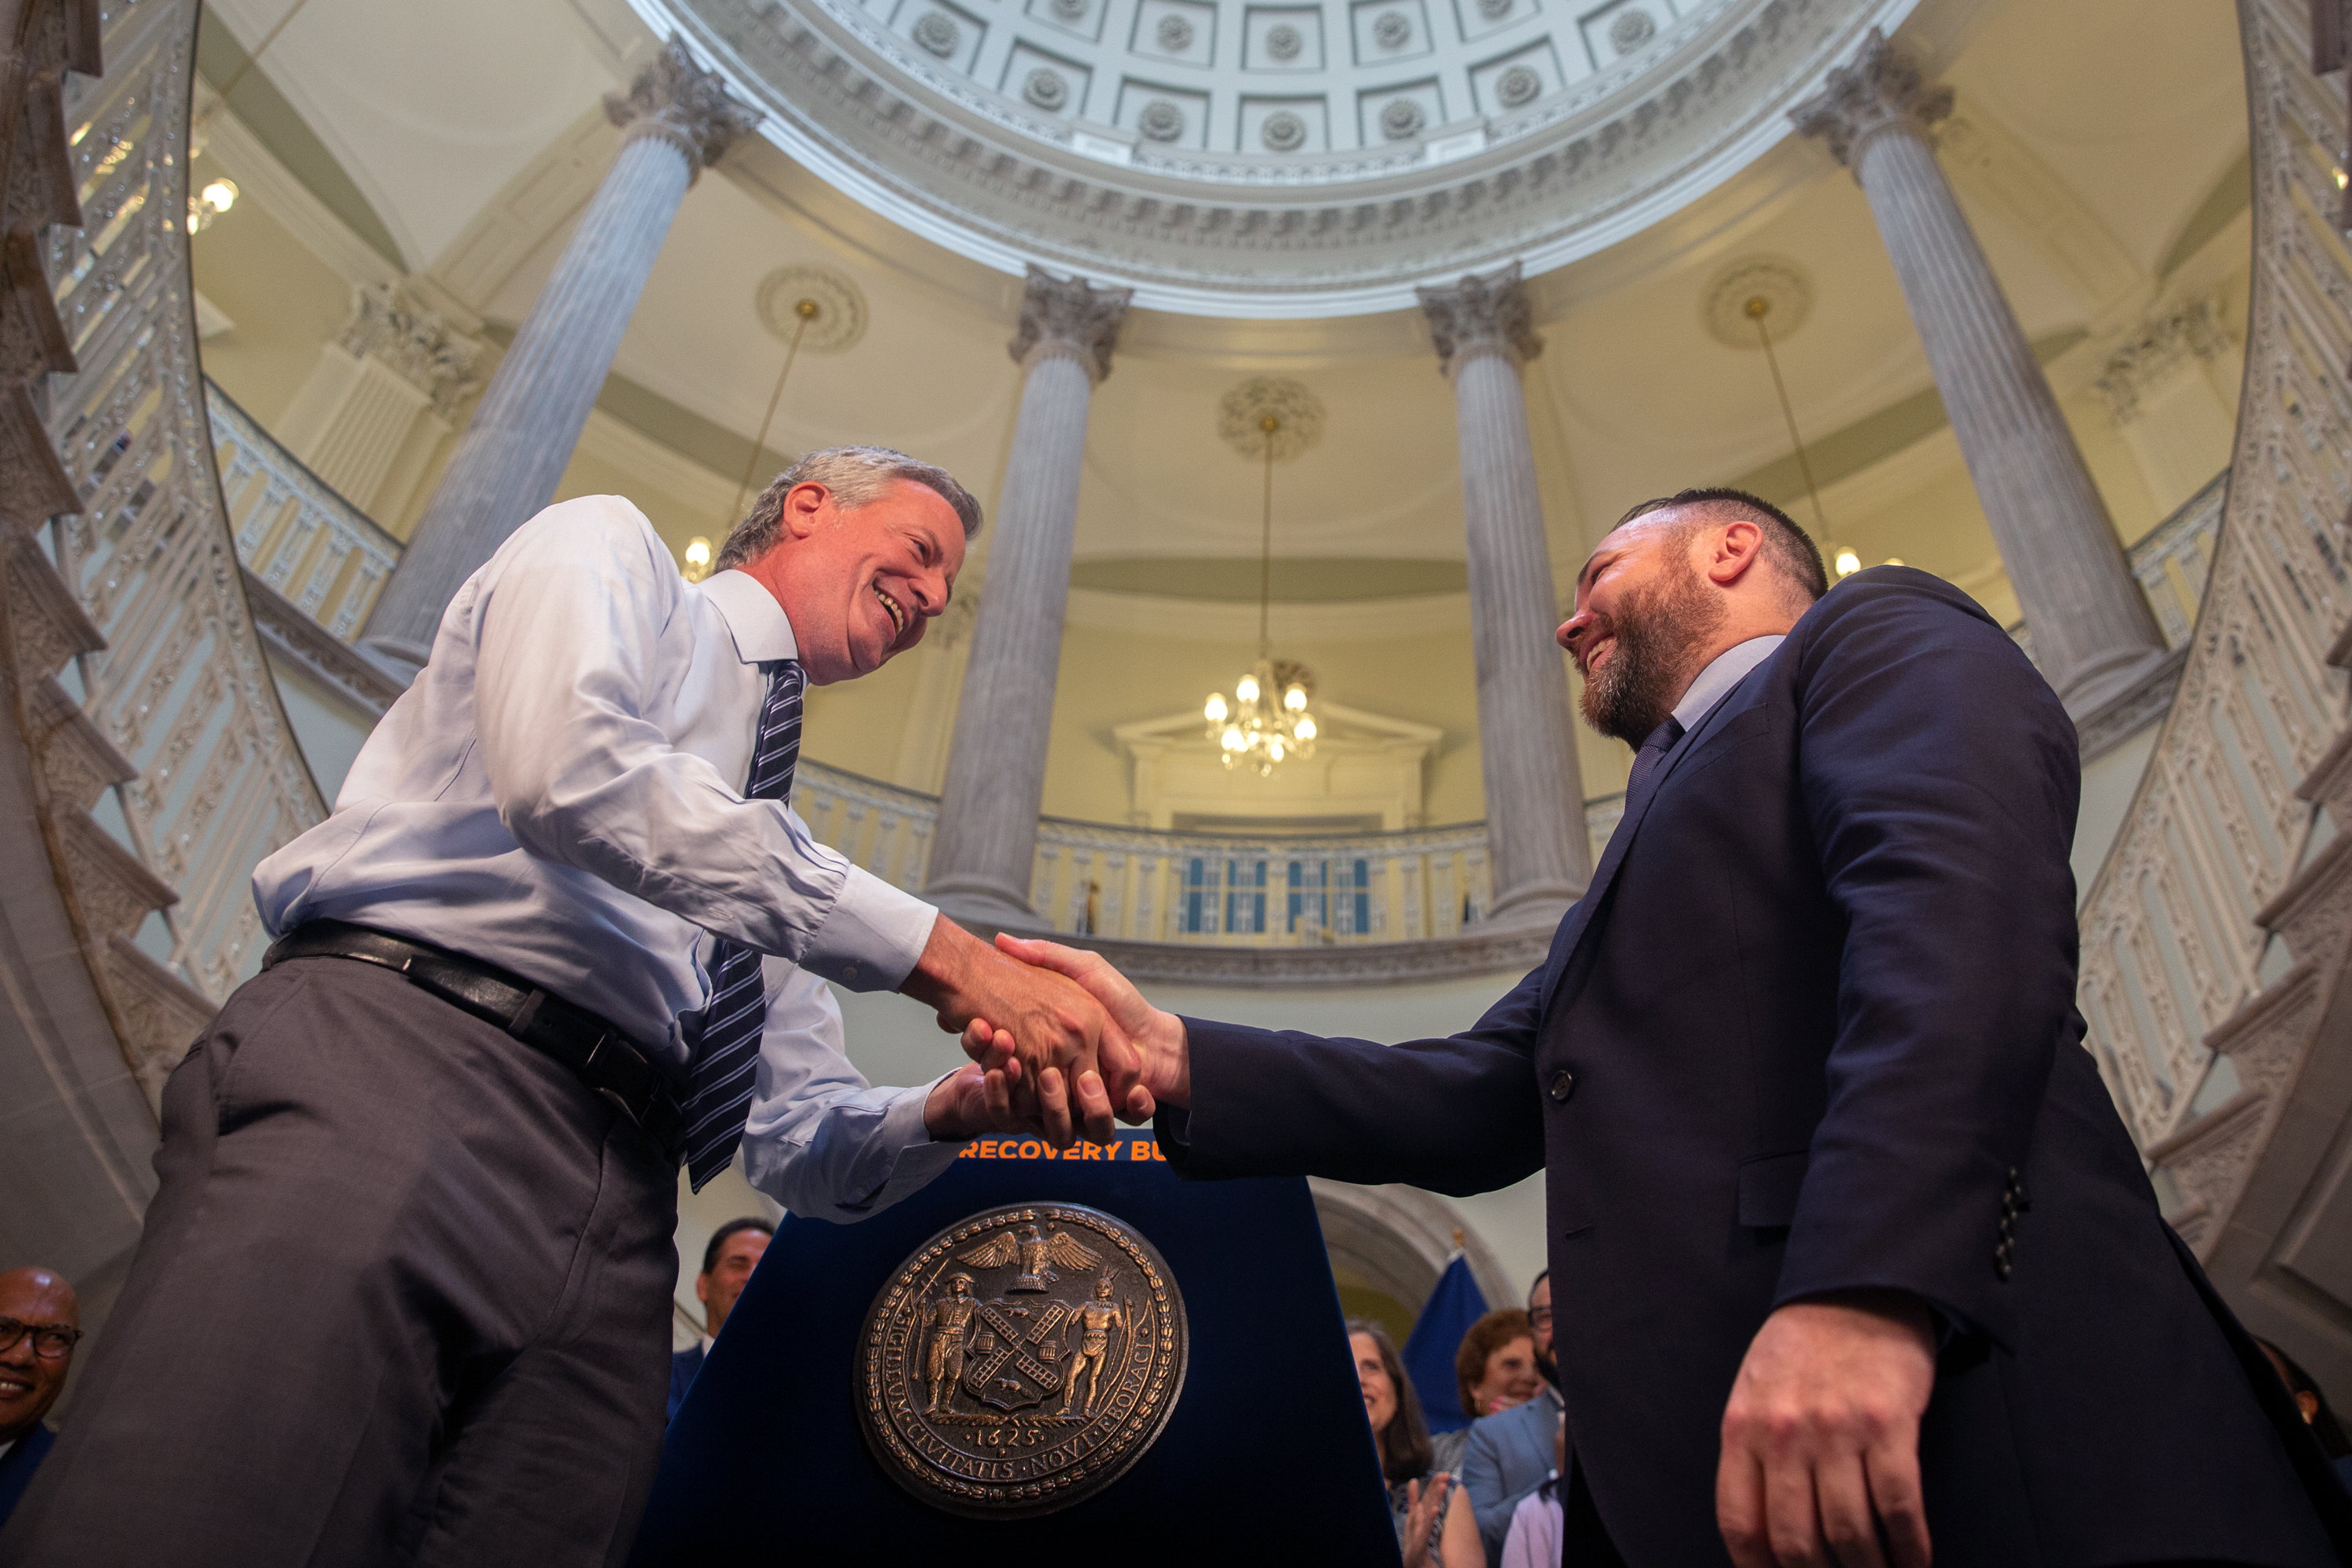 Mayor Bill de Blasio and Council Speaker Corey Johnson shake hands at City Hall on a budget deal, June 30, 2021.